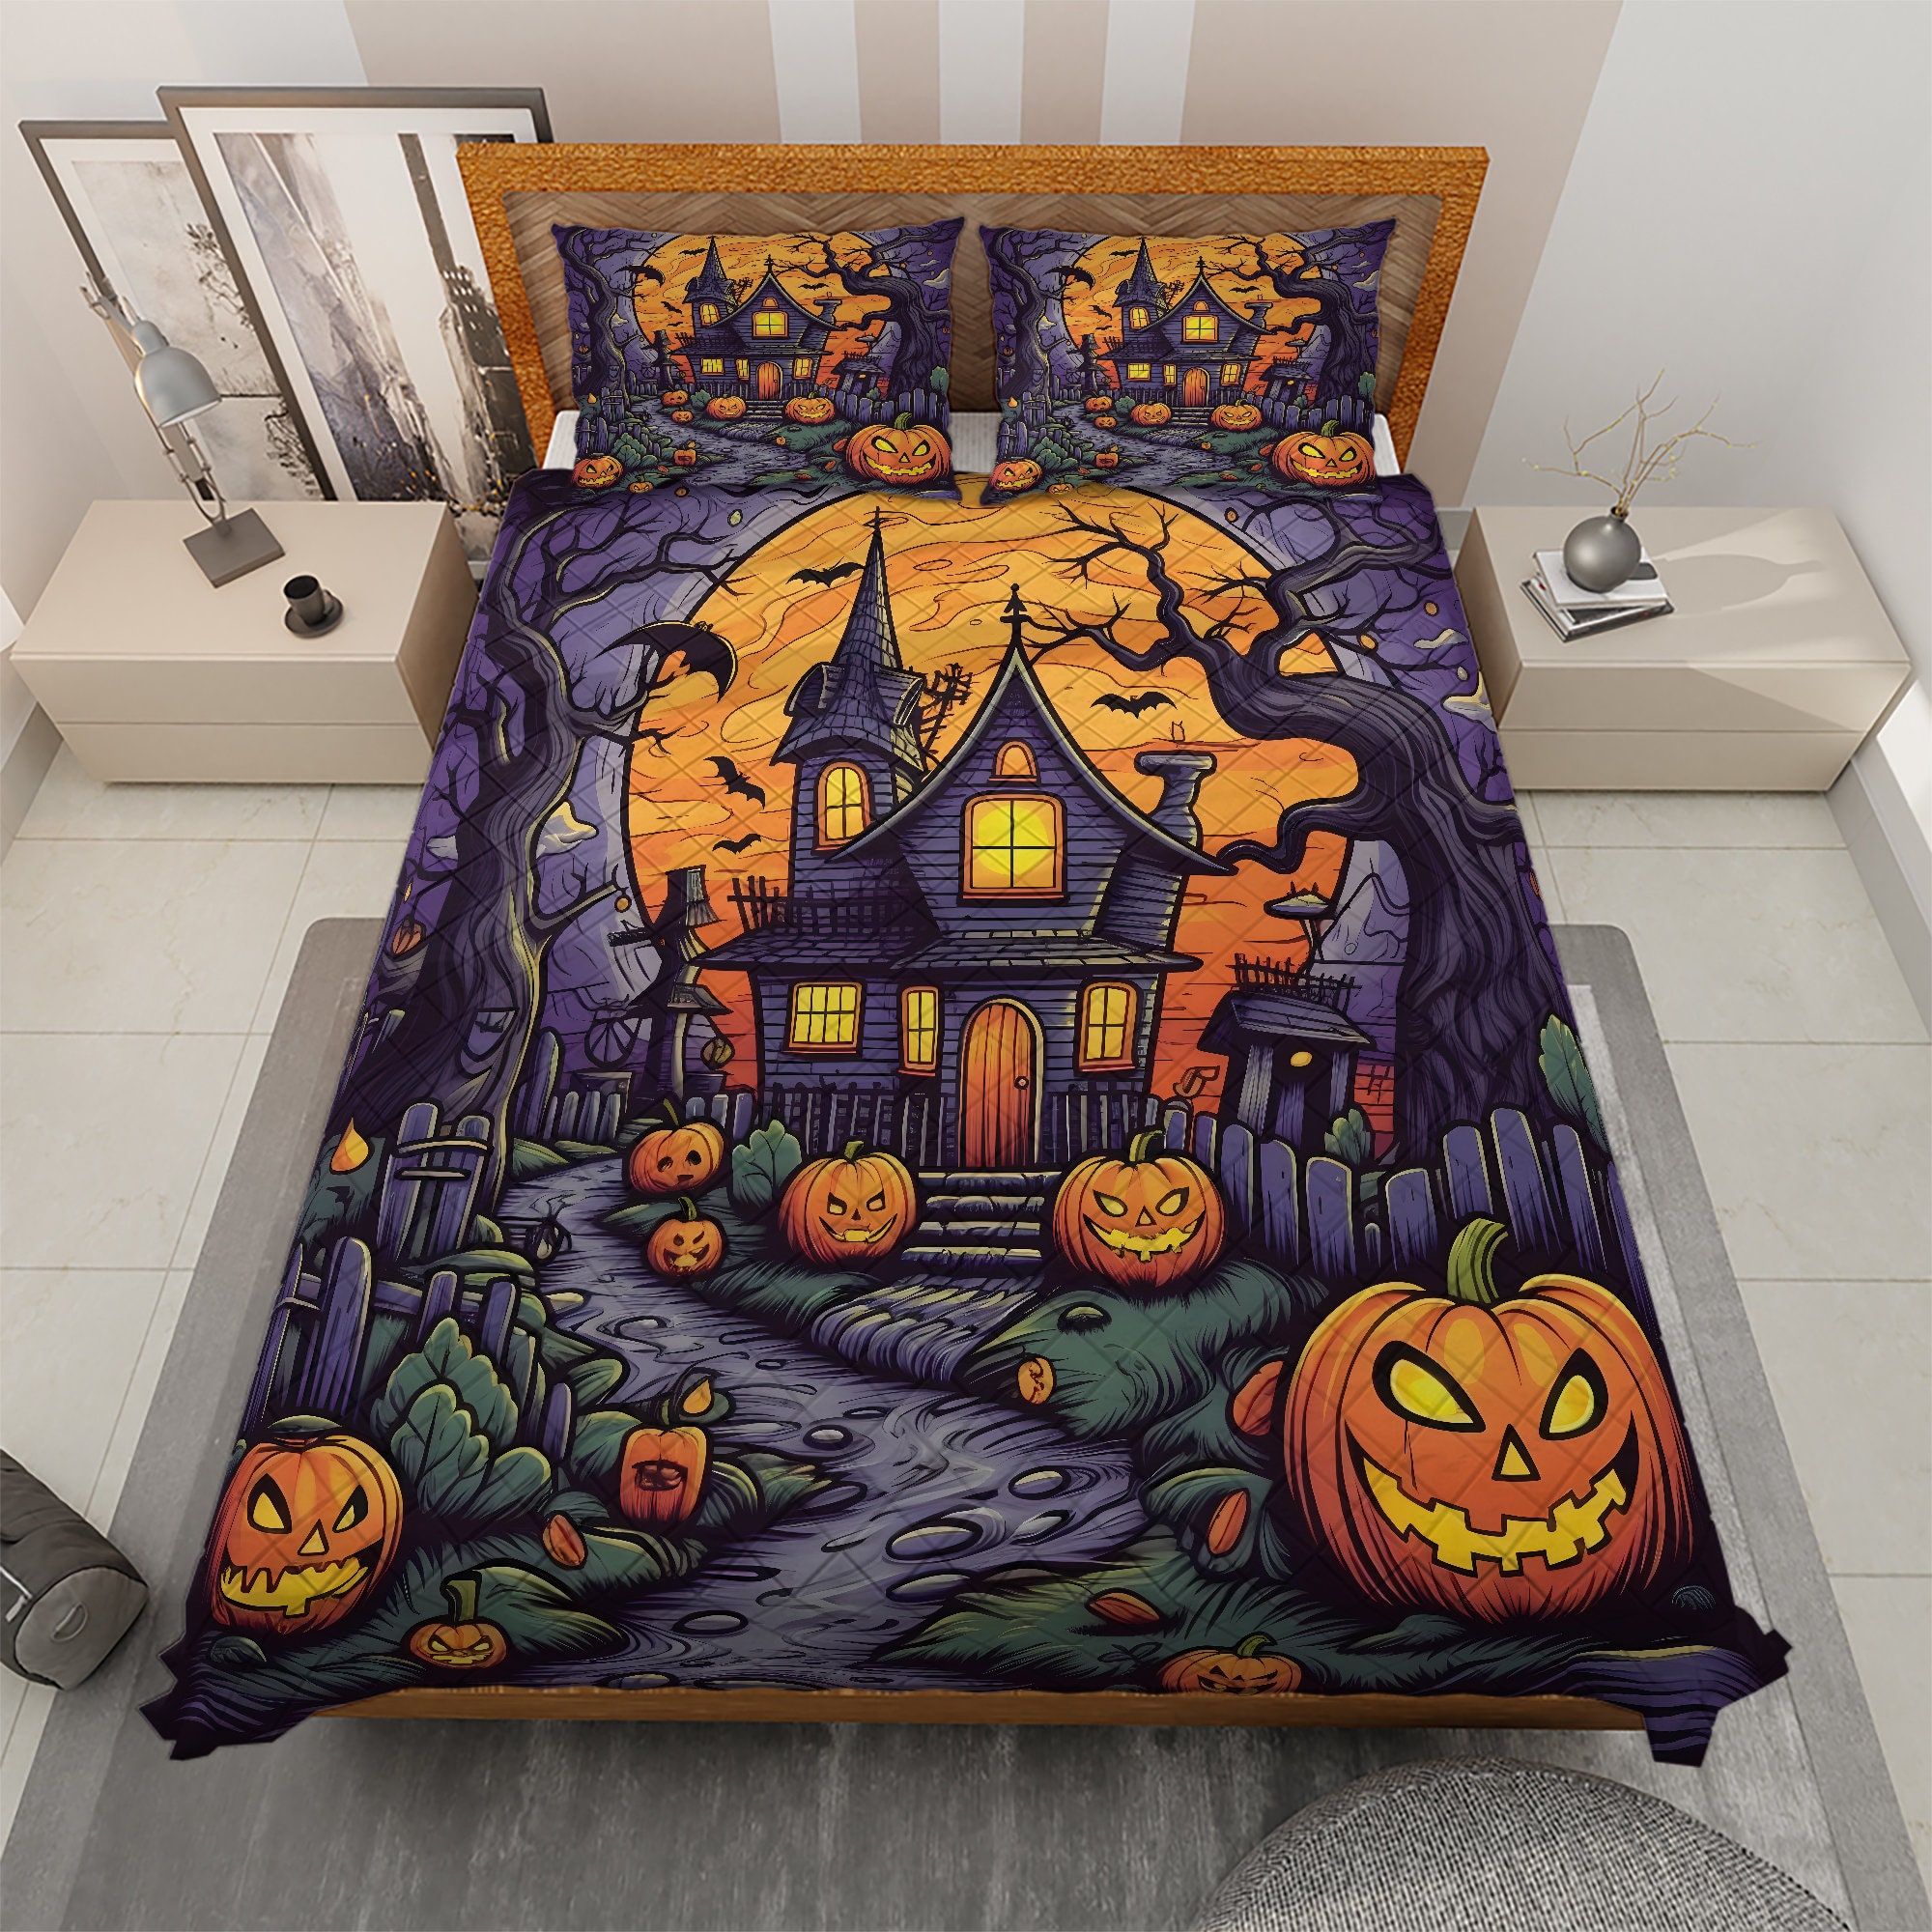 Vintage Halloween Themed Sheets Twin Size,White Spider Web Bed